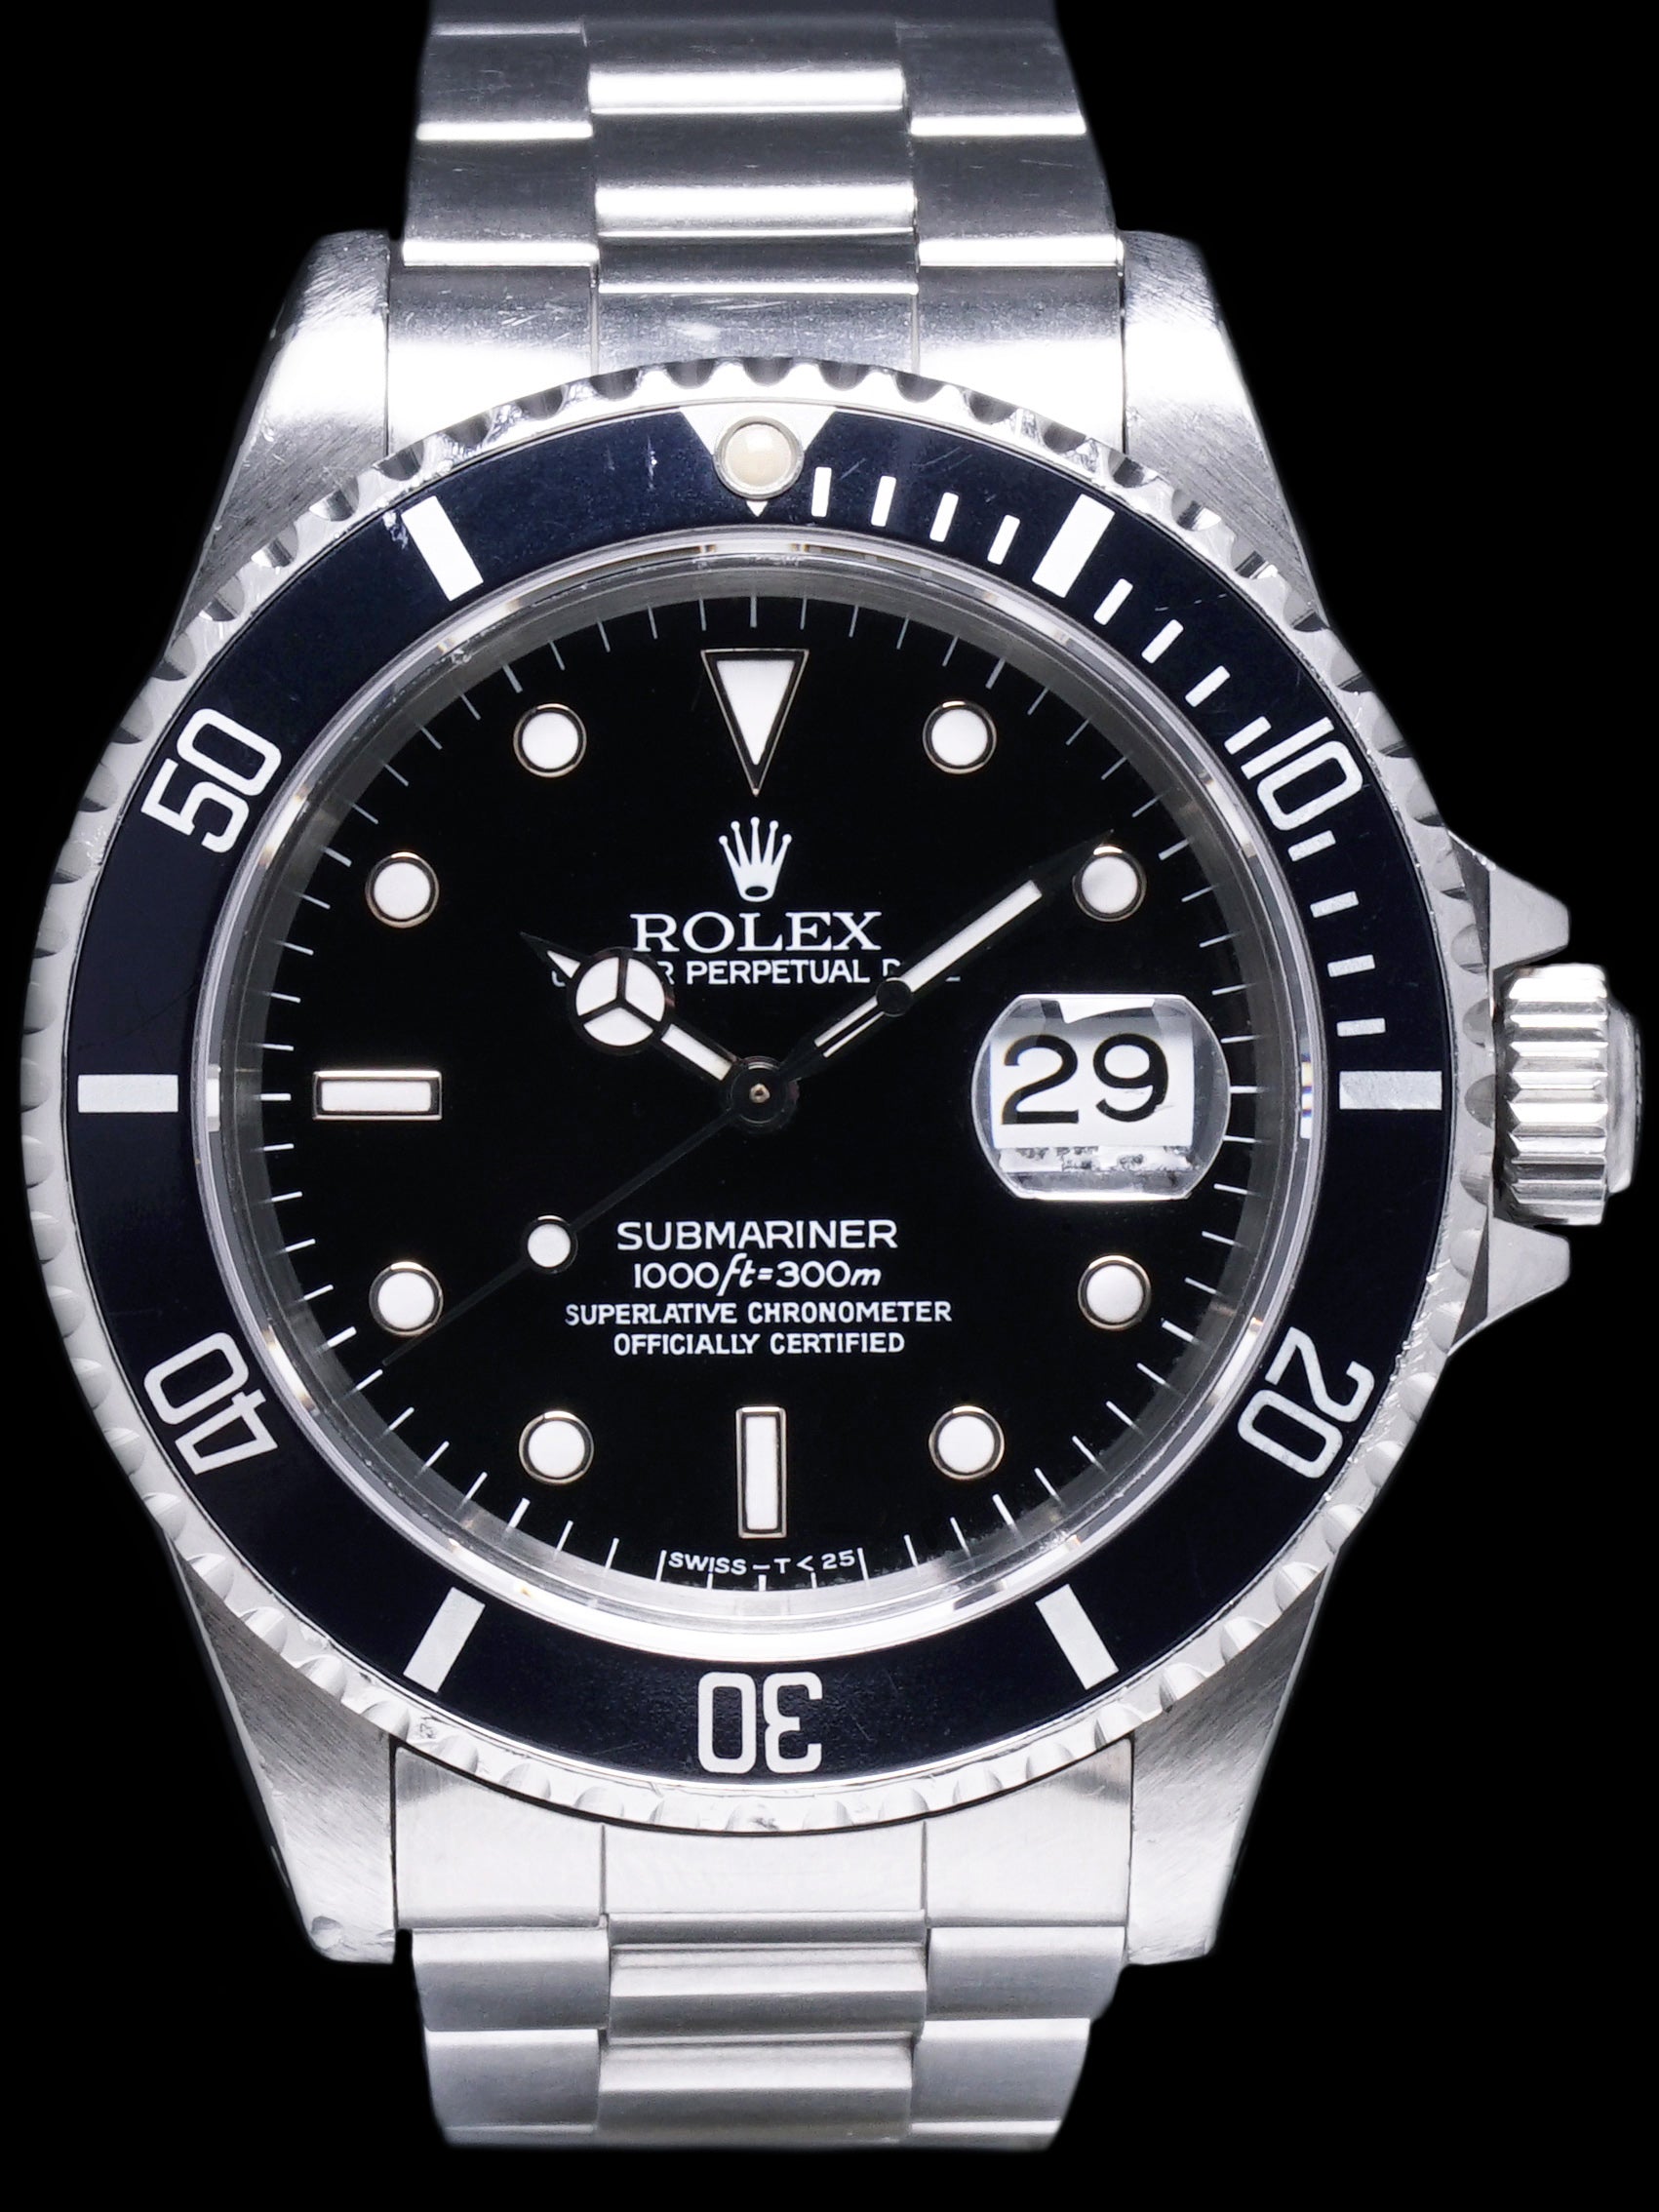 *Unpolished* 1994 Rolex Submariner (Ref. 16610) W/ Box and Papers